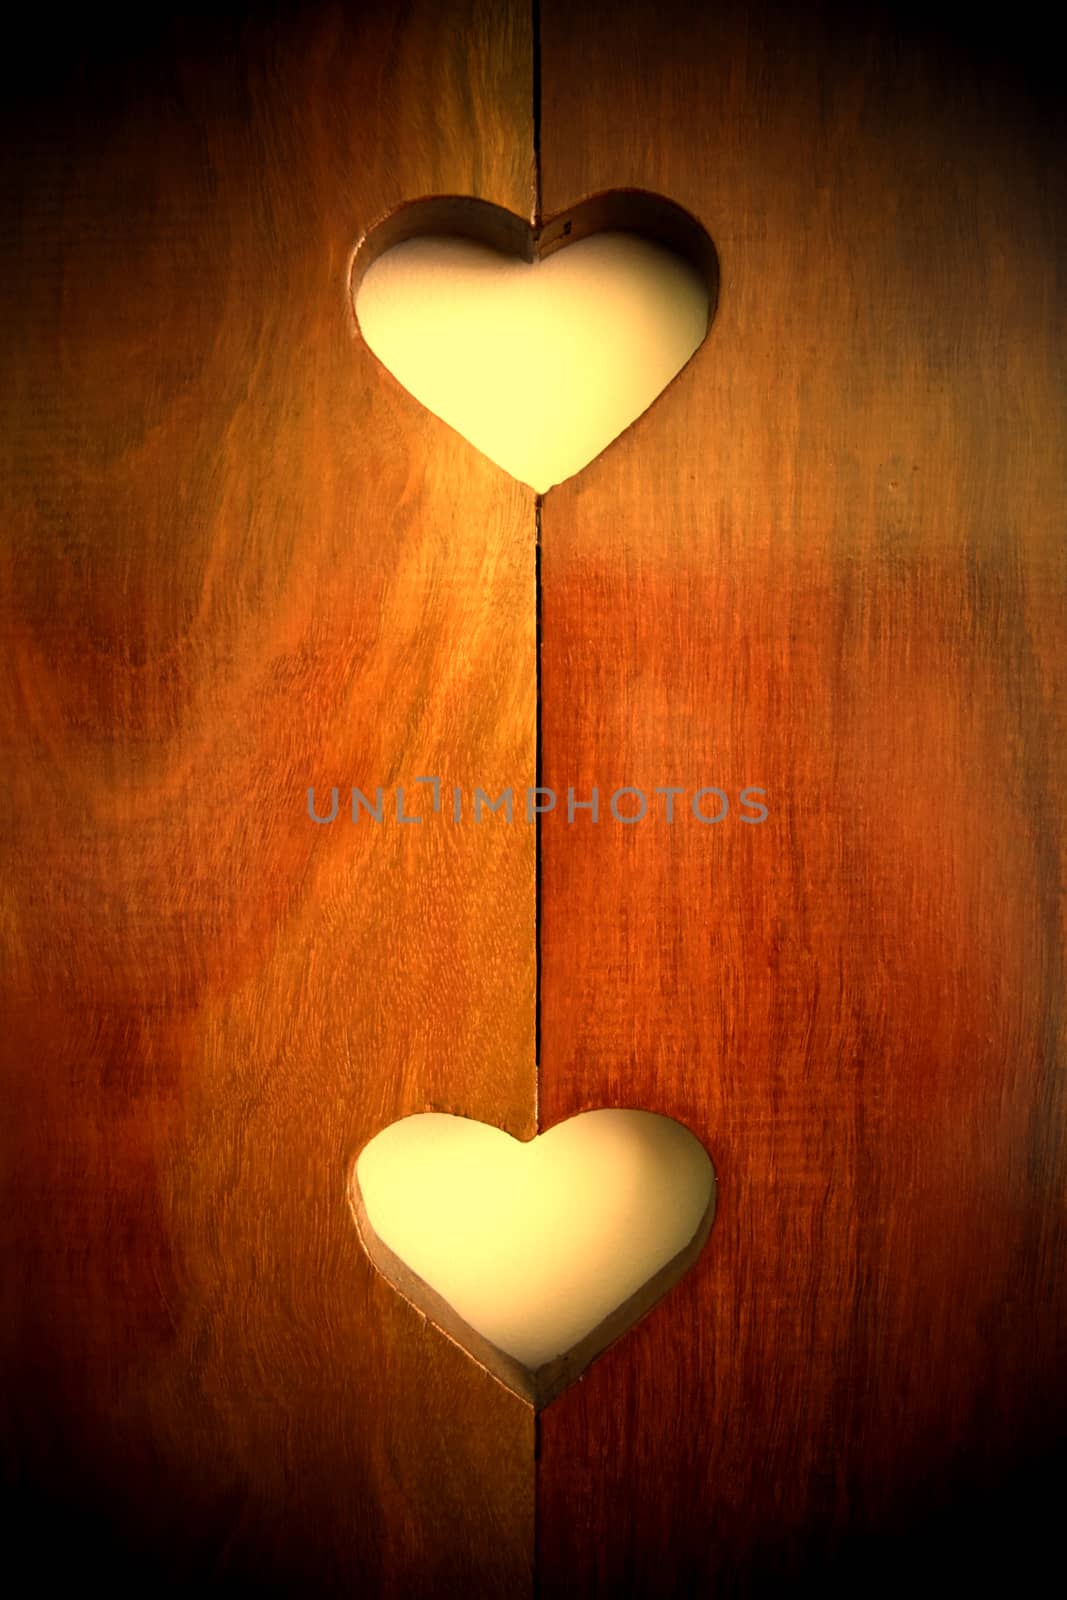 Heart shape carved in wood.